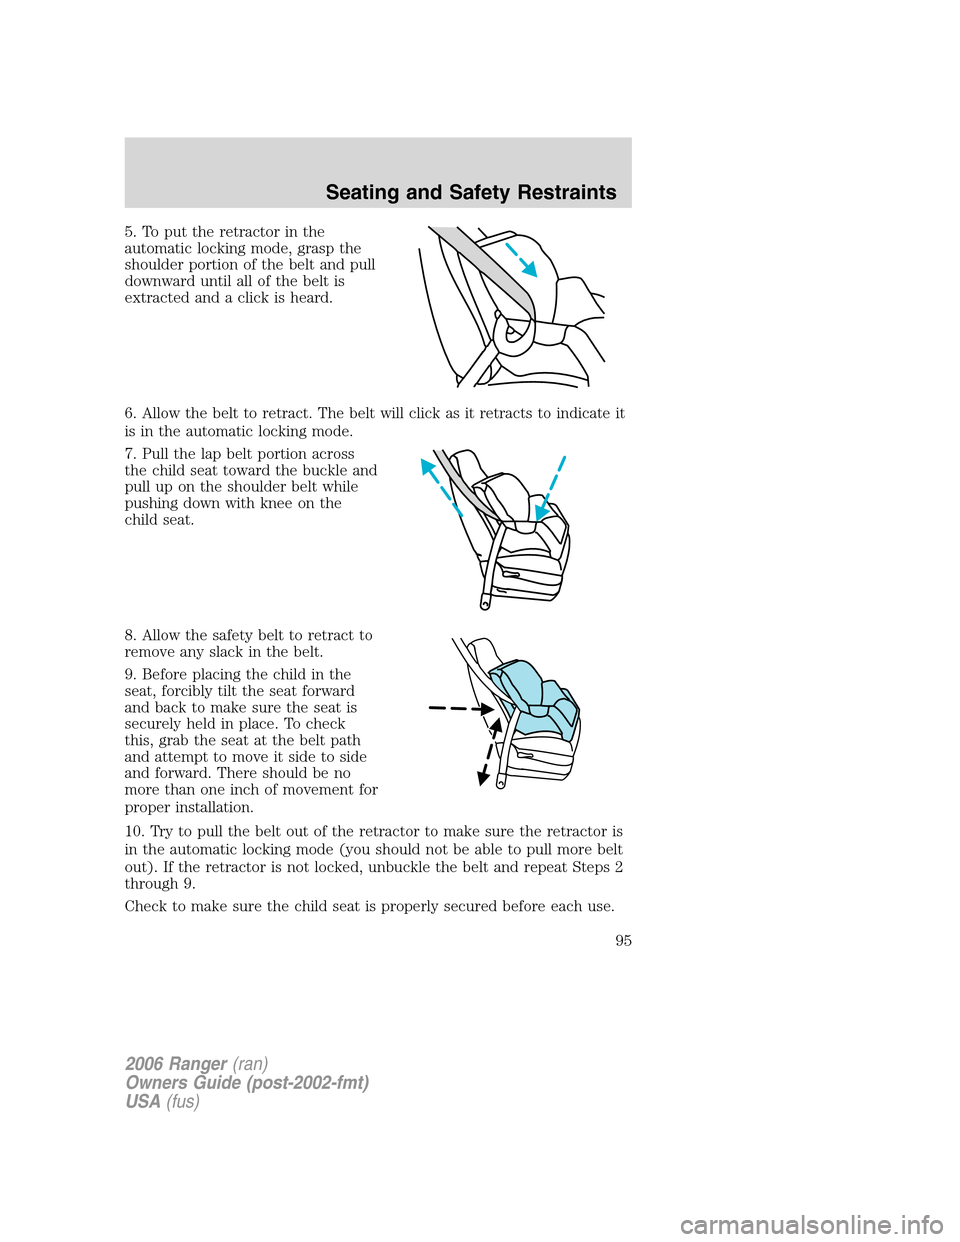 FORD RANGER 2006 2.G Owners Manual 5. To put the retractor in the
automatic locking mode, grasp the
shoulder portion of the belt and pull
downward until all of the belt is
extracted and a click is heard.
6. Allow the belt to retract. T